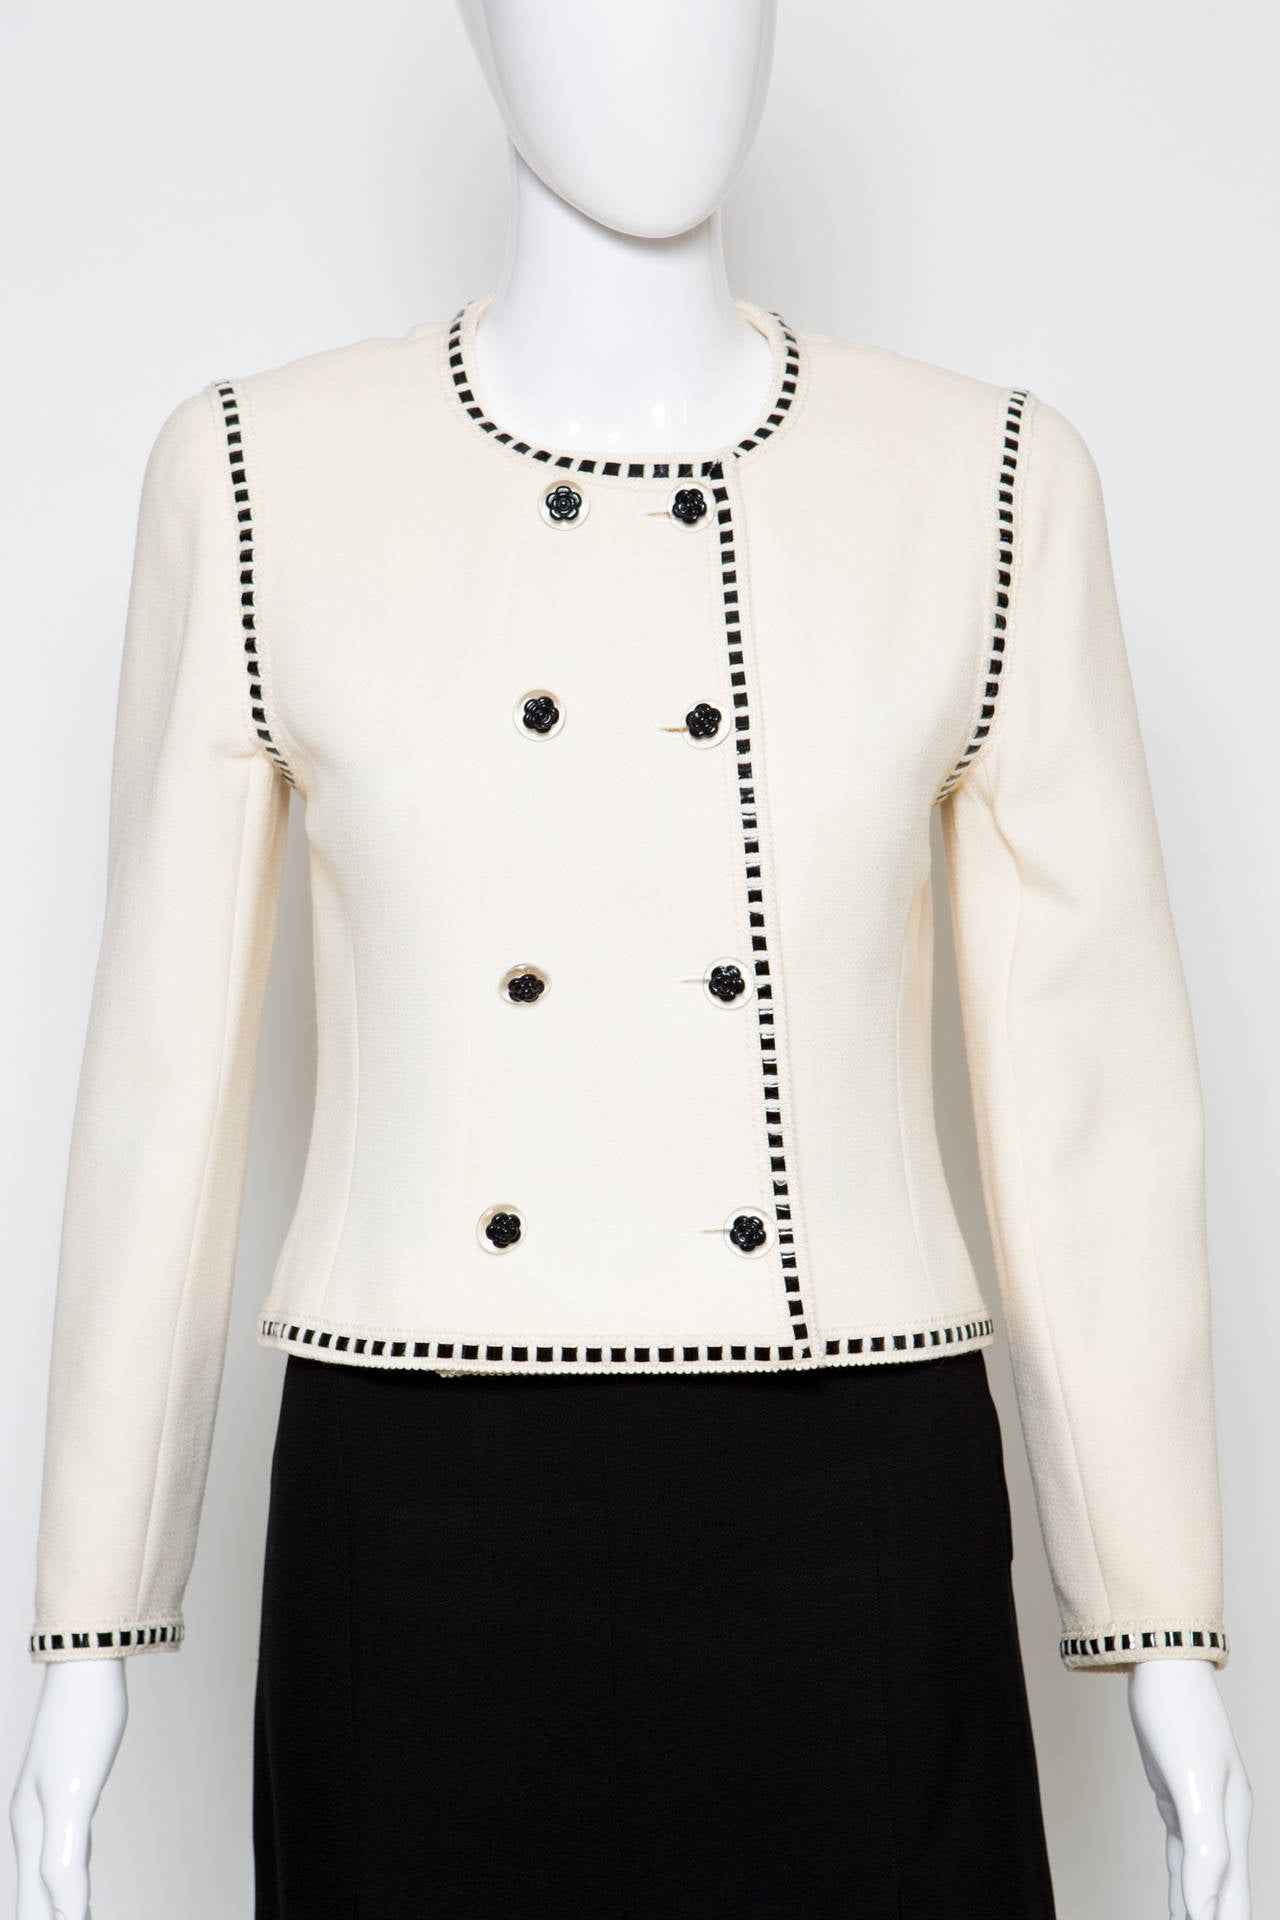 1990s Chanel off-white wool crepe boucle jacket featuring  a black vinyl ribbon at front and at cuffs, transparent and black camellias resin buttons,  a silk logo lining ,  and a 24kt gilded gold hardware chain in the bottom lining.
Estimated size